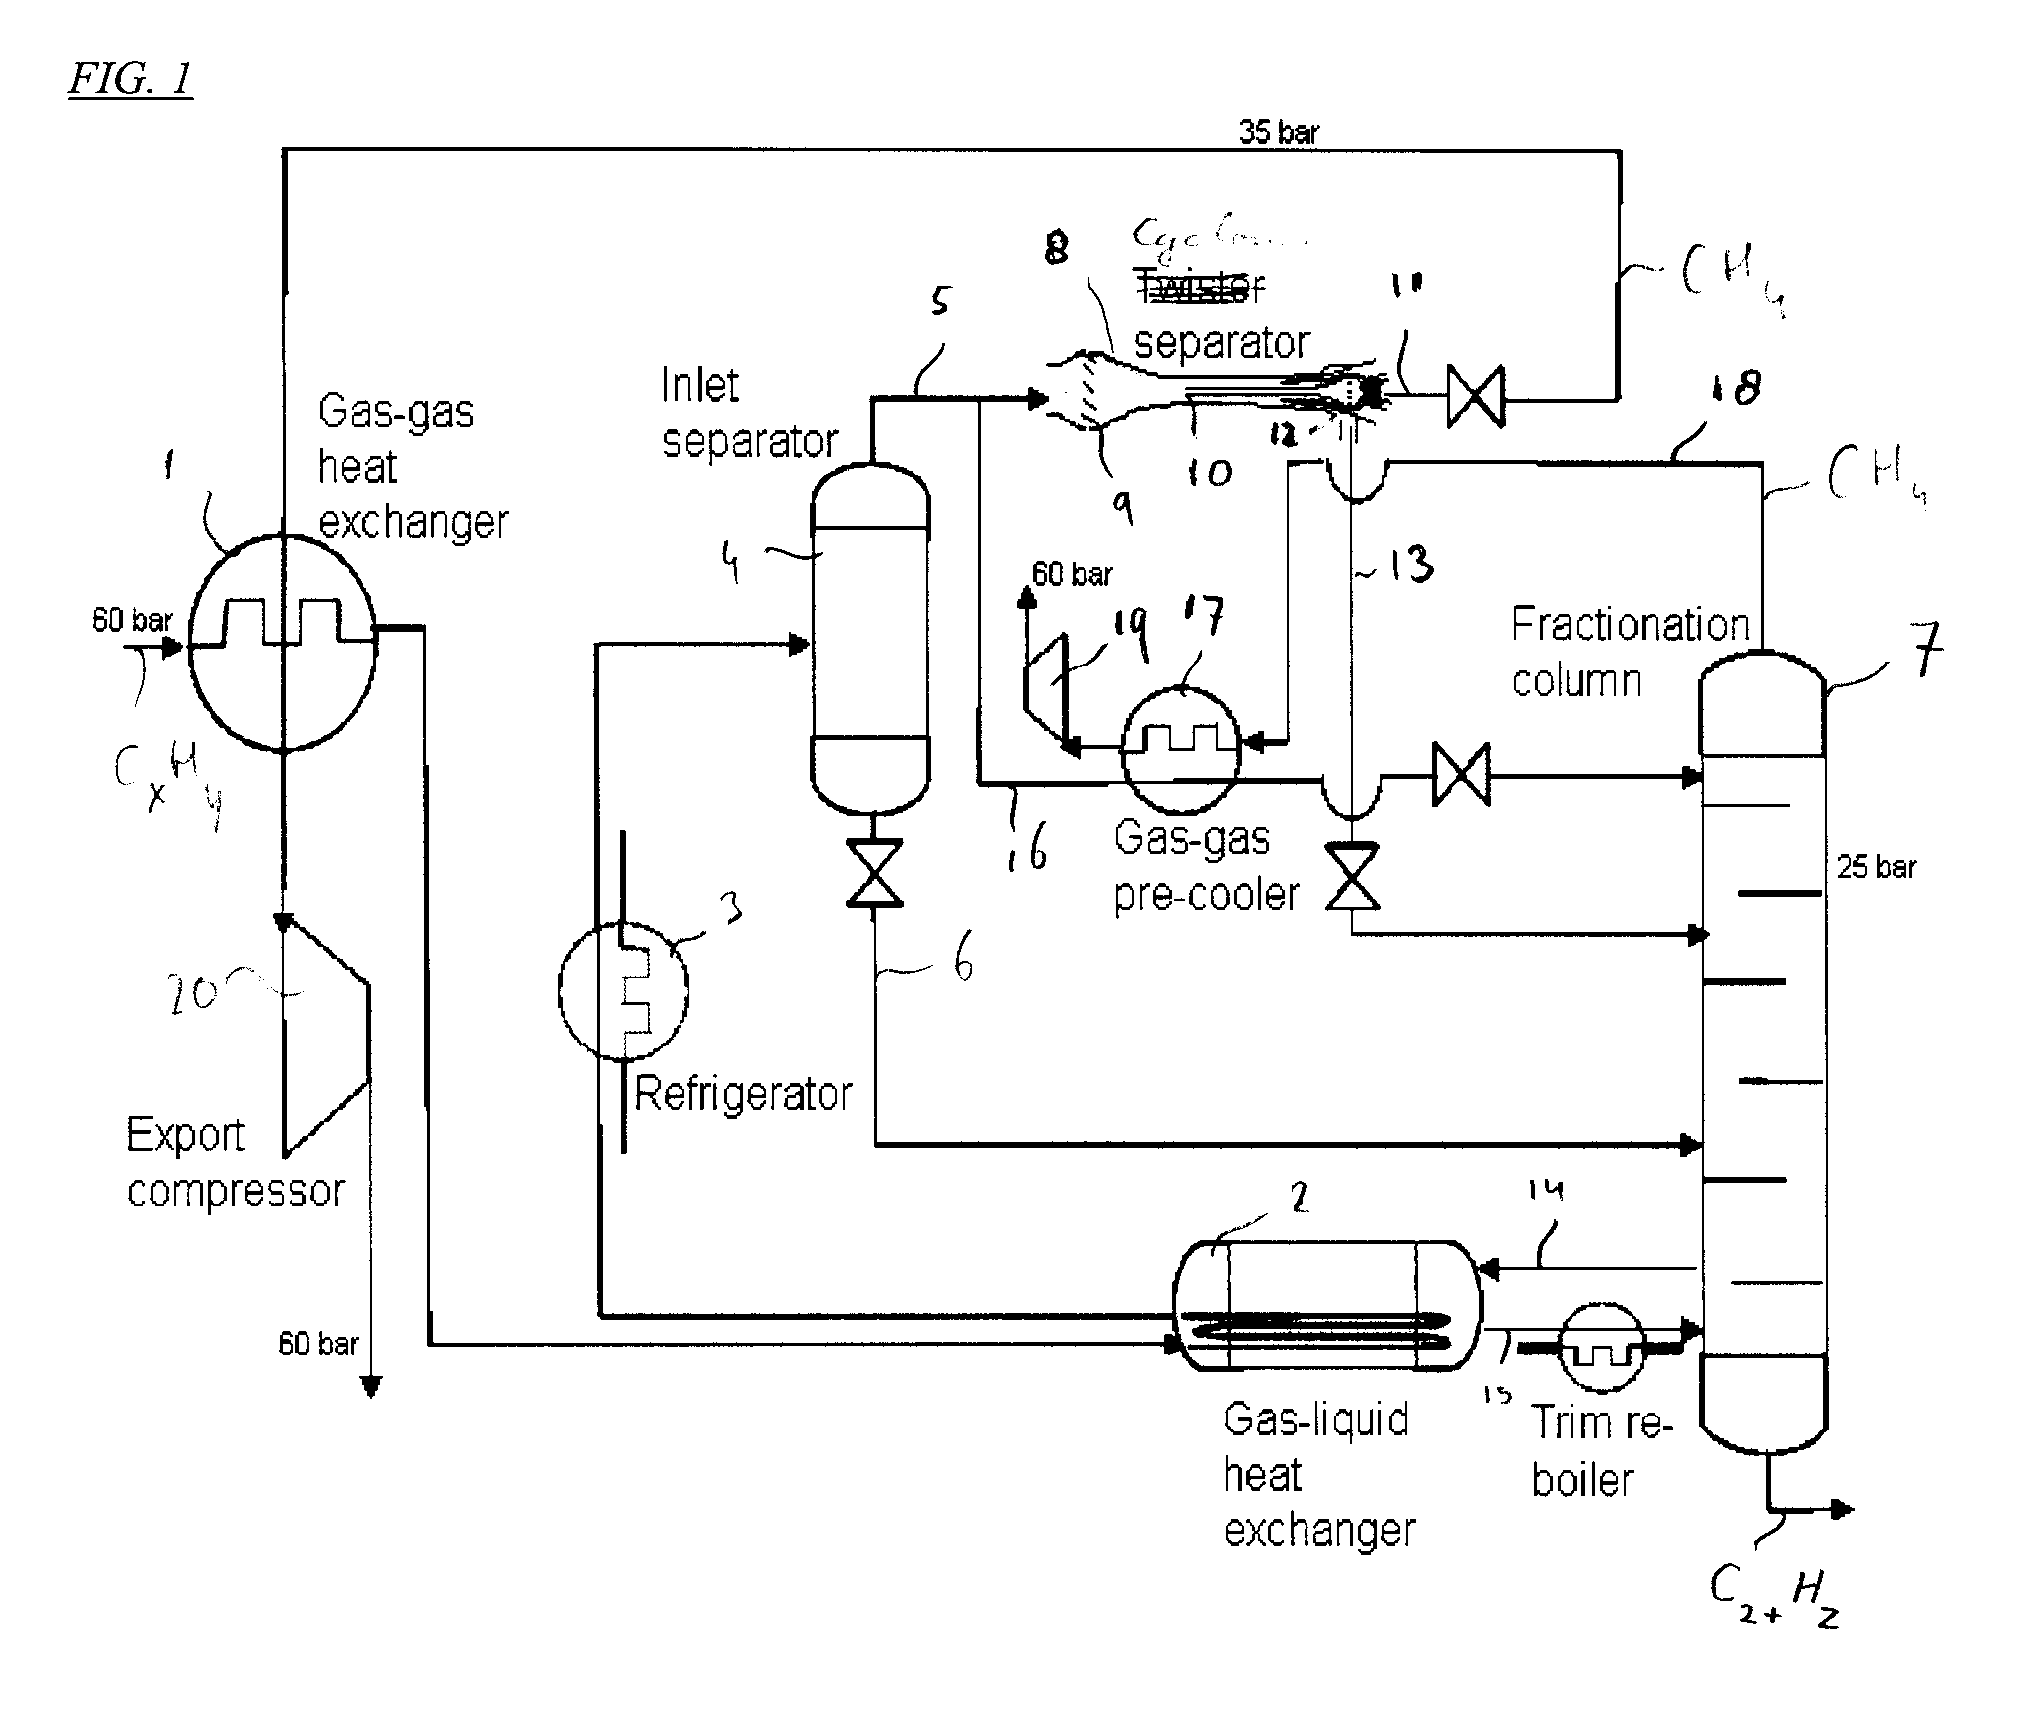 Method and System for Cooling a Natural Gas Stream and Separating the Cooled Stream Into Various Fractions